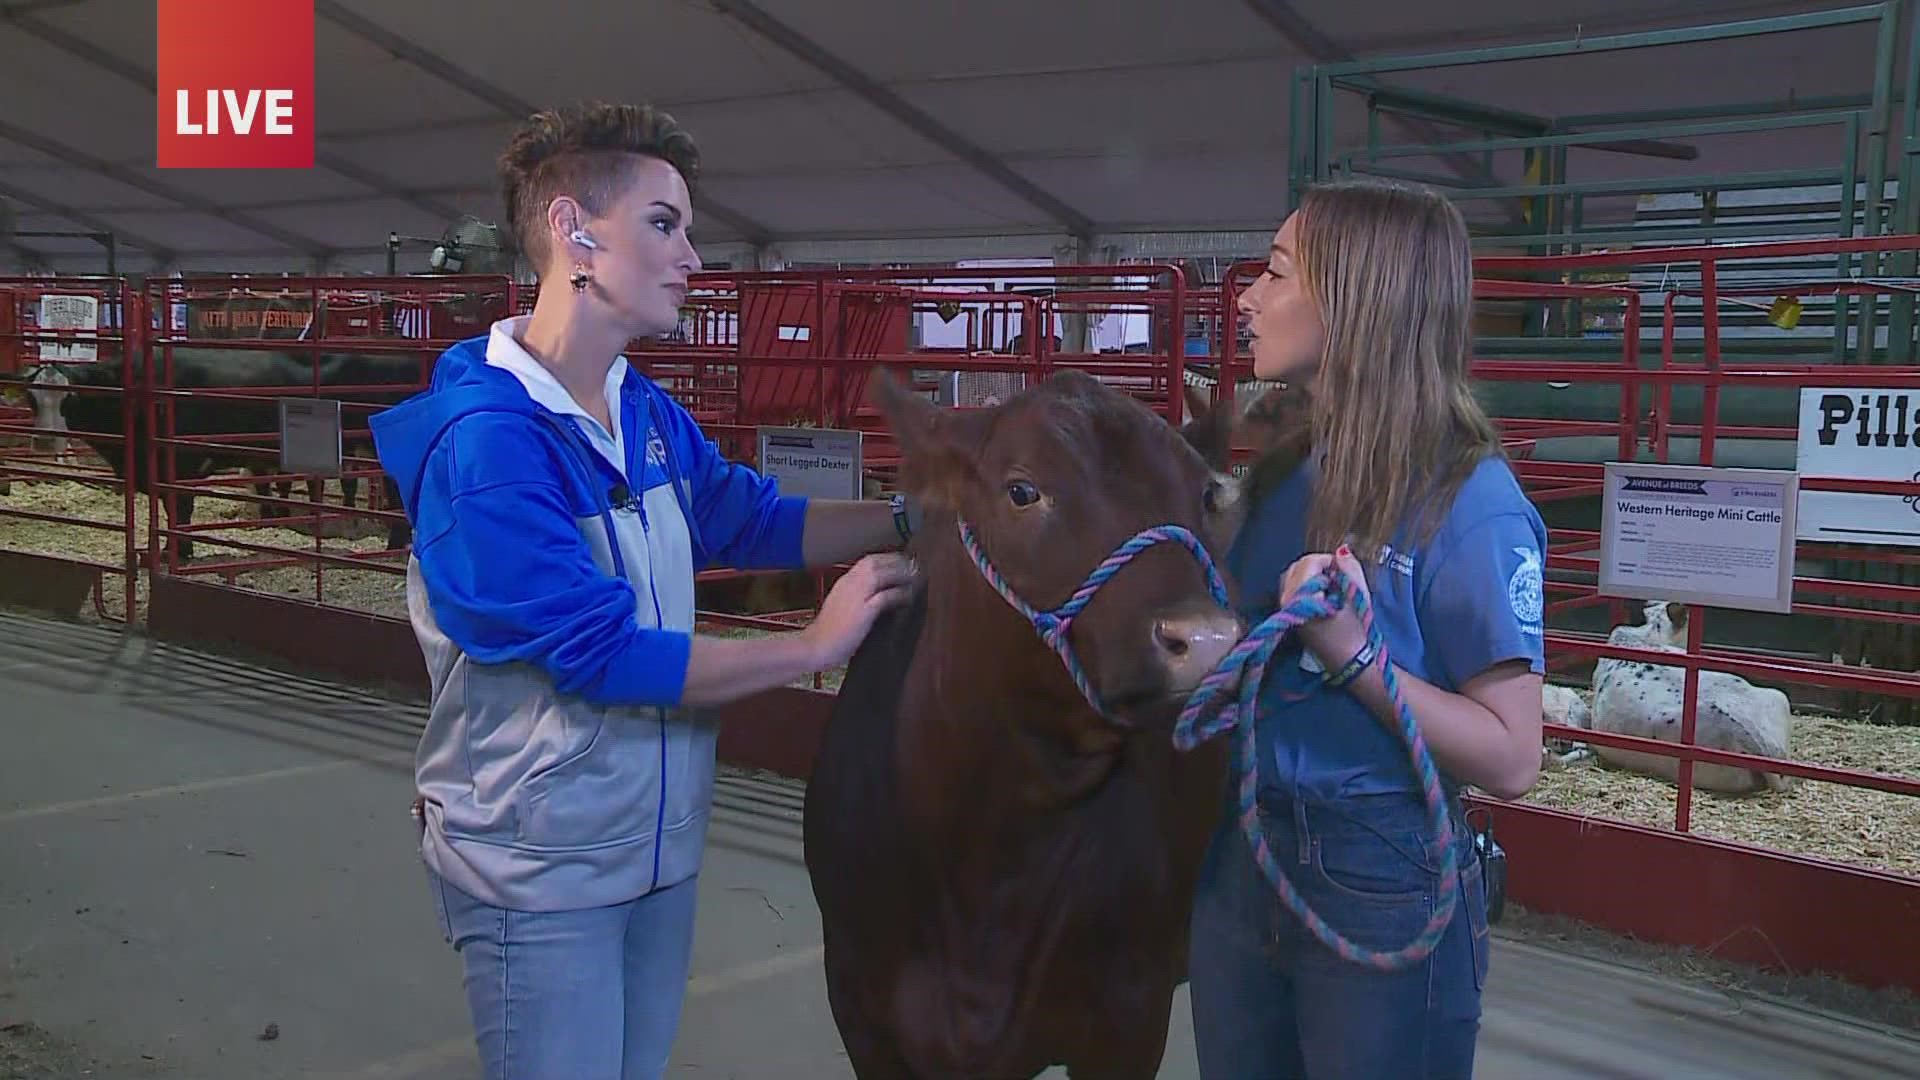 You can get up close to some awesome animals at Avenue of the Breeds, located in the southwest corner of the Iowa State Fair.